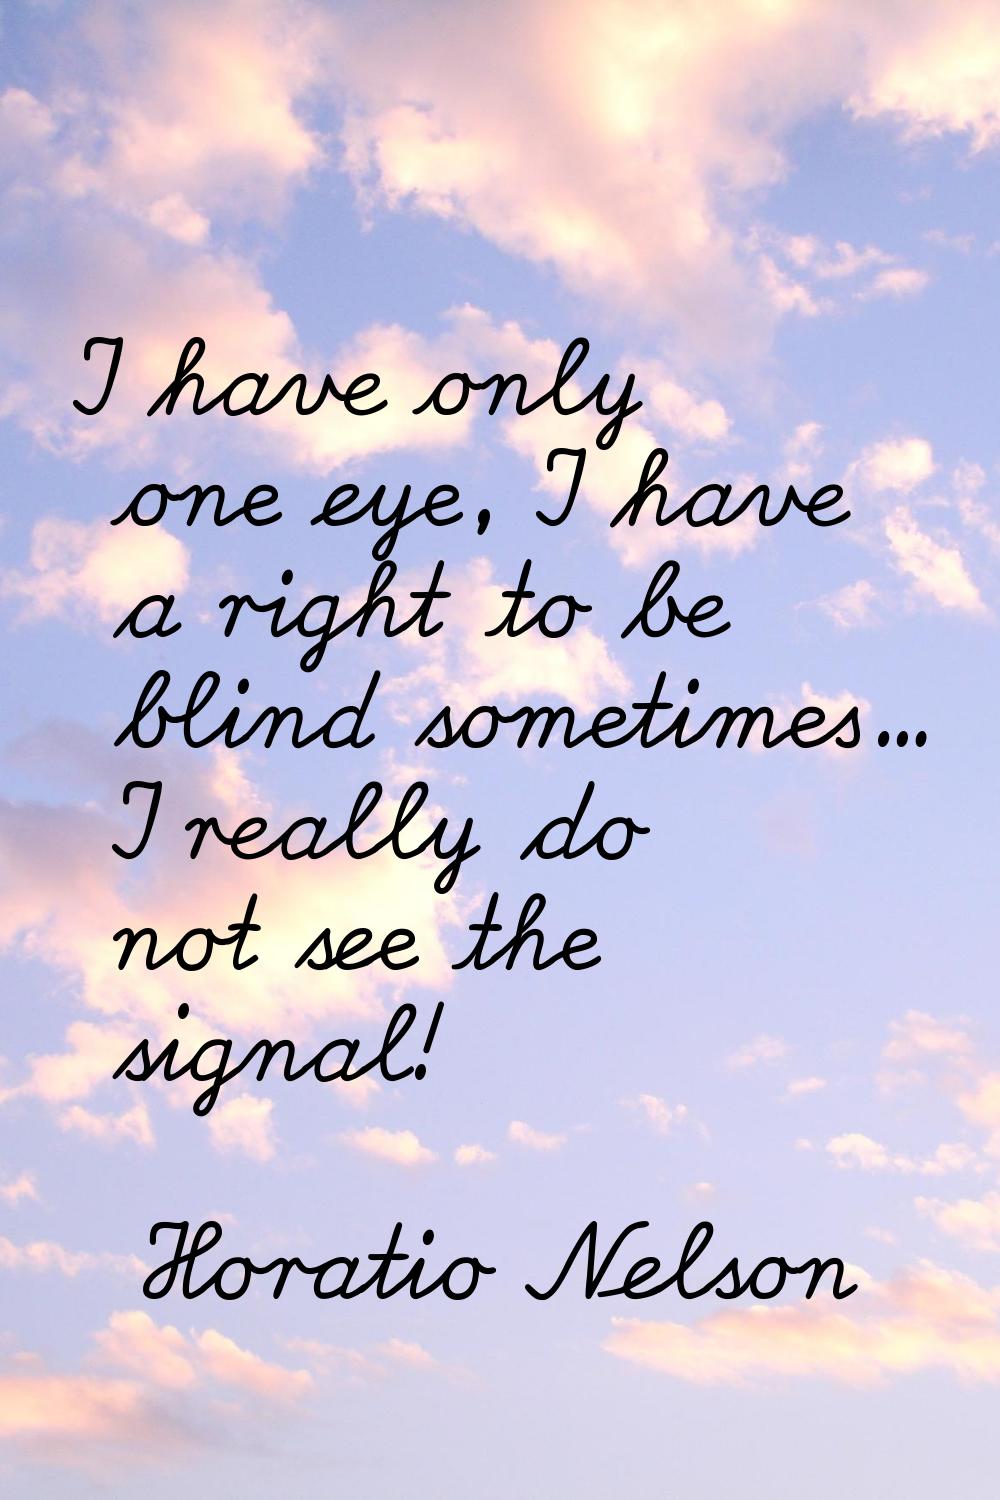 I have only one eye, I have a right to be blind sometimes... I really do not see the signal!